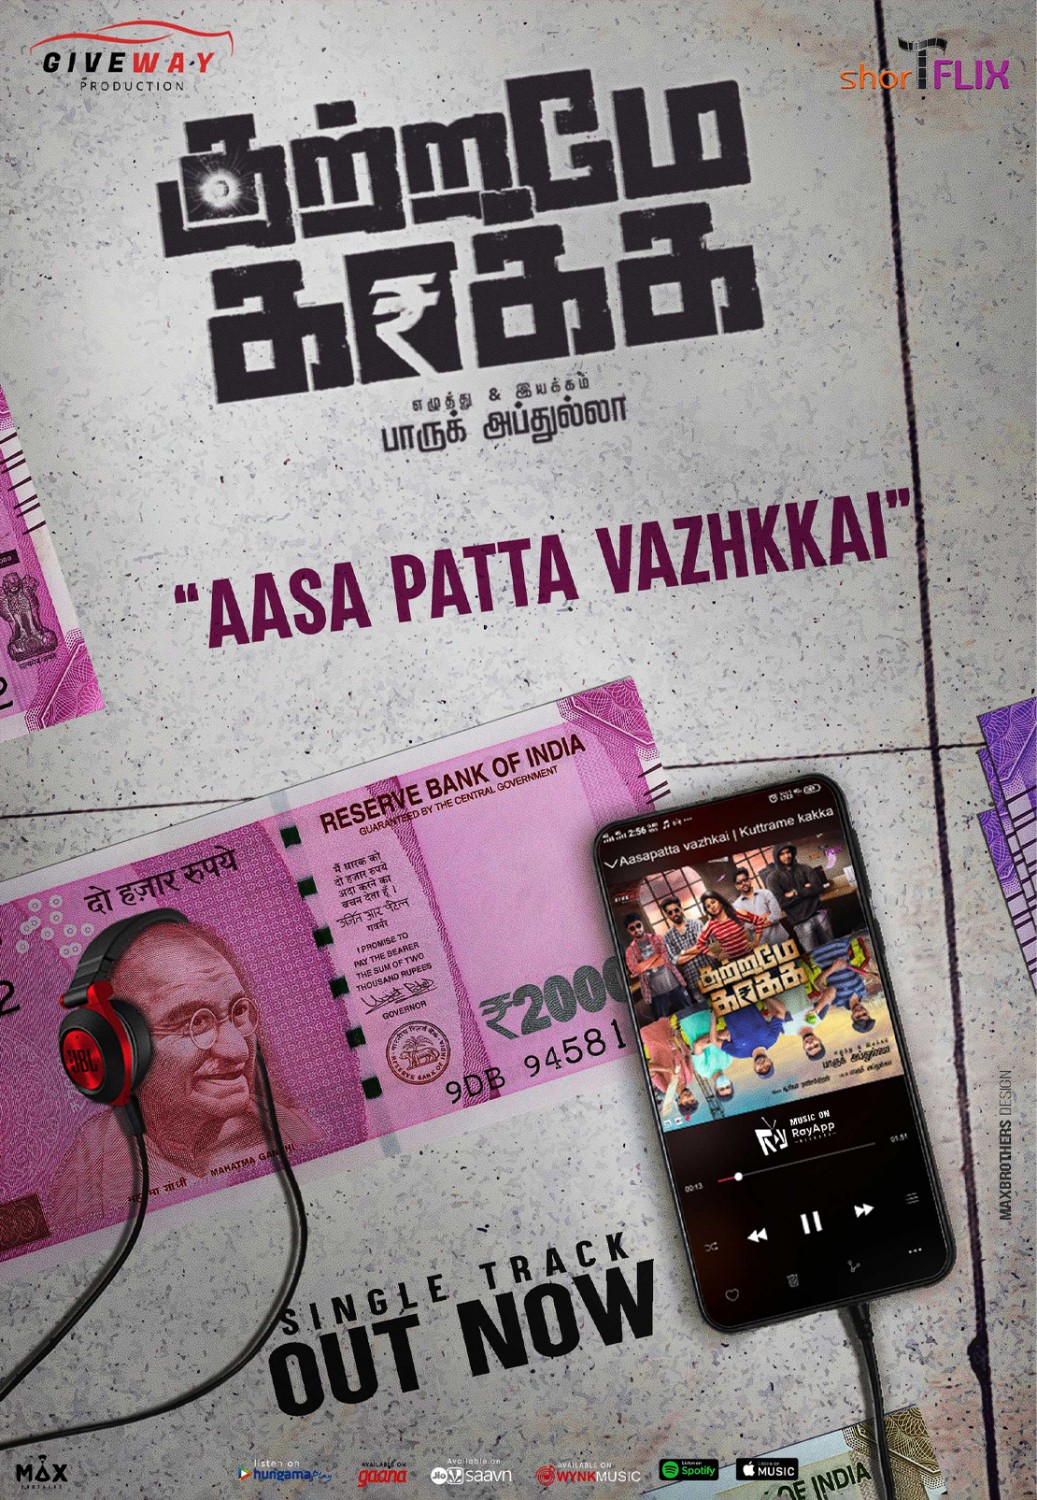 Extra Large Movie Poster Image for Kutrame Kaakka